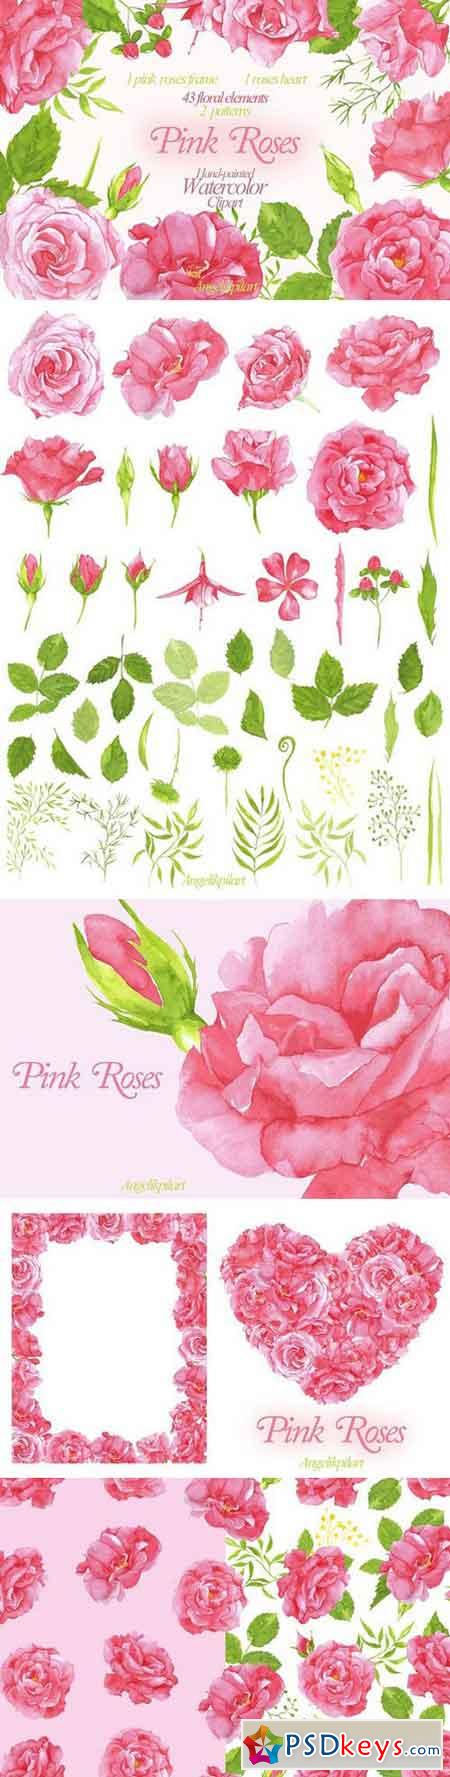 watercolor Pink Roses clipart 1522731